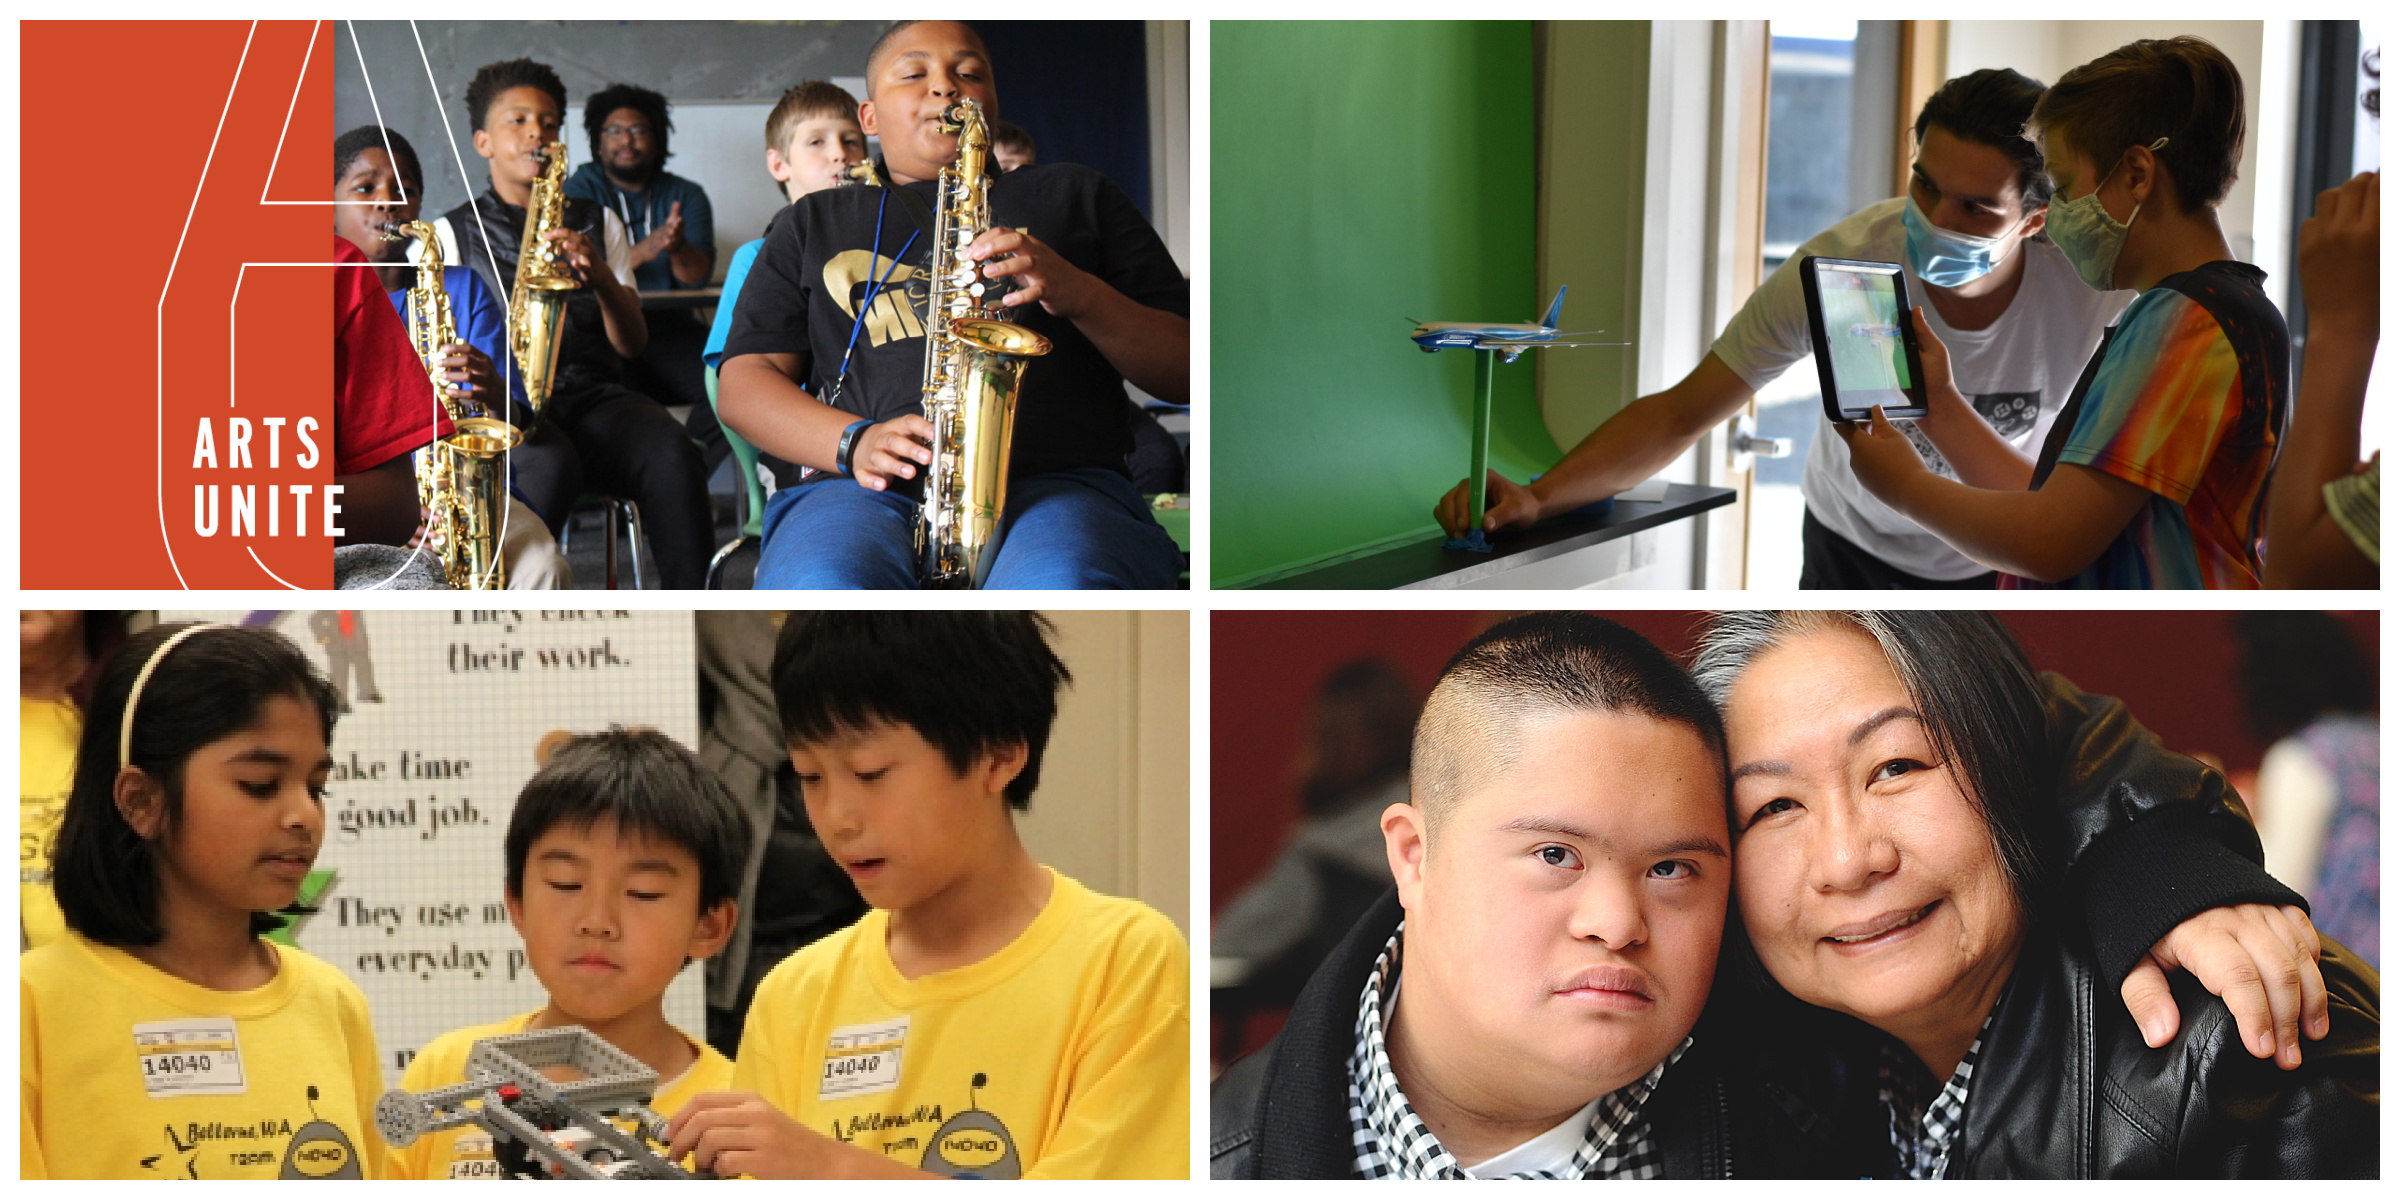 Image 1: four children play wind instruments while a man claps in the background, with a text overlay that says "Arts Unite." Image 2: three young children in yellow shirts build something. Image 3: a young boy and a man wearing masks take a photo of a model airplane using an iPad. Image 4: A boy and a woman hug and look at the camera. 